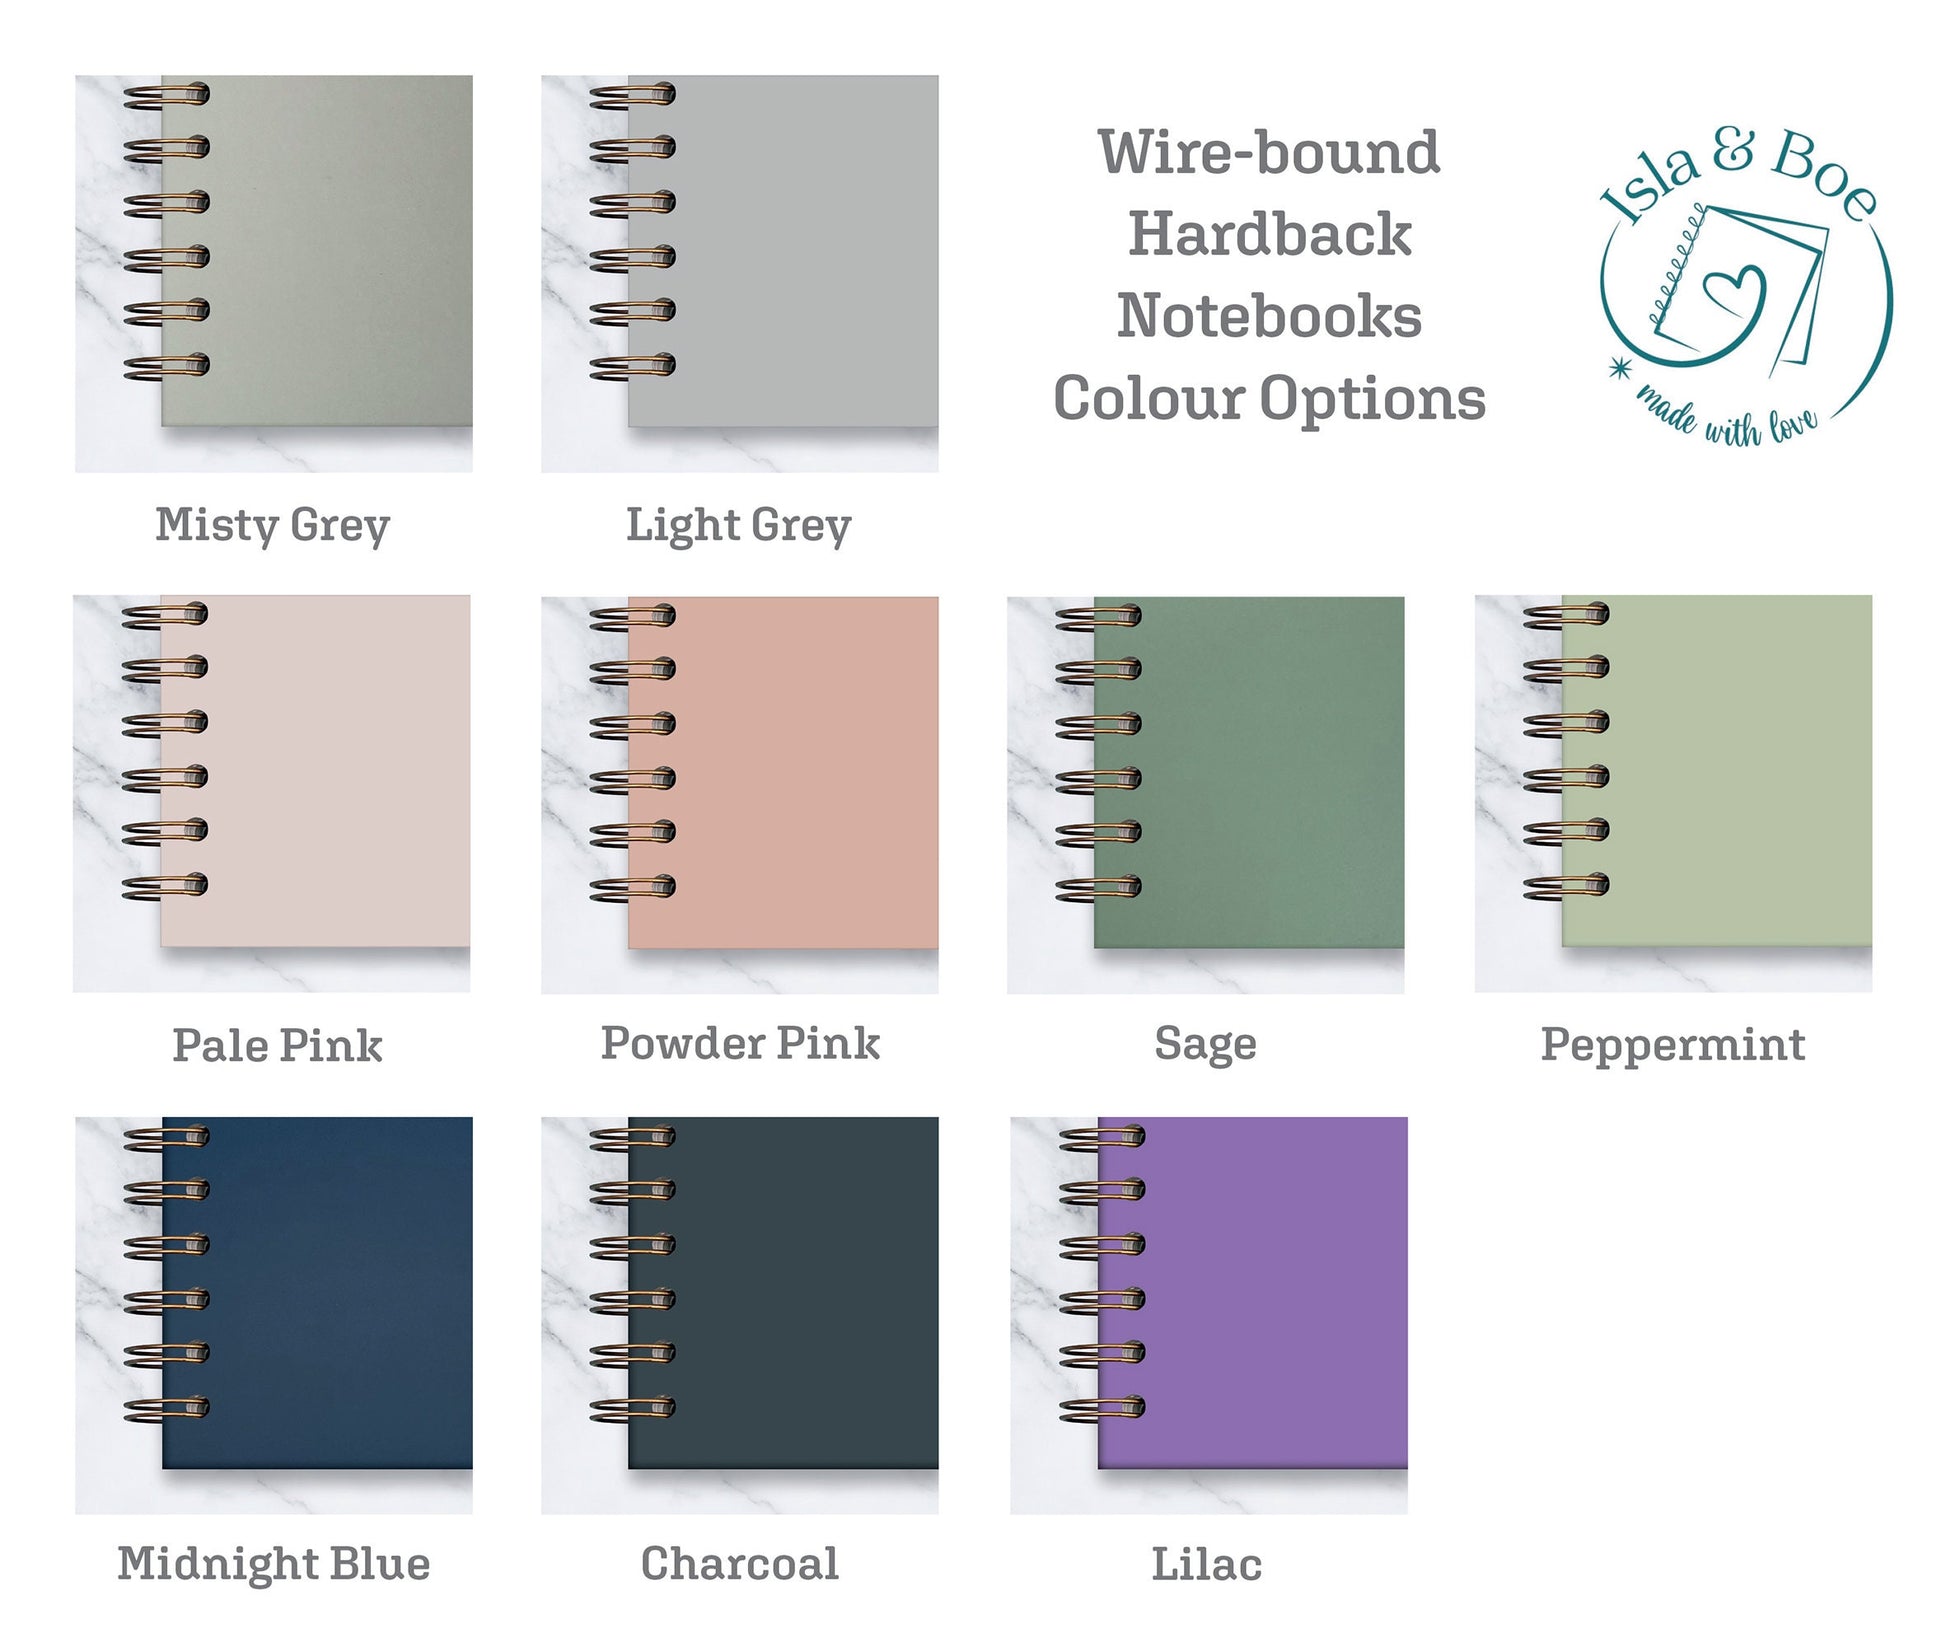 Hardback notebook colour swatch options. Misty grey, Light grey, Pale pink, Powder pink, Sage, Peppermint, Midnight Blue, Charcoal and Lilac